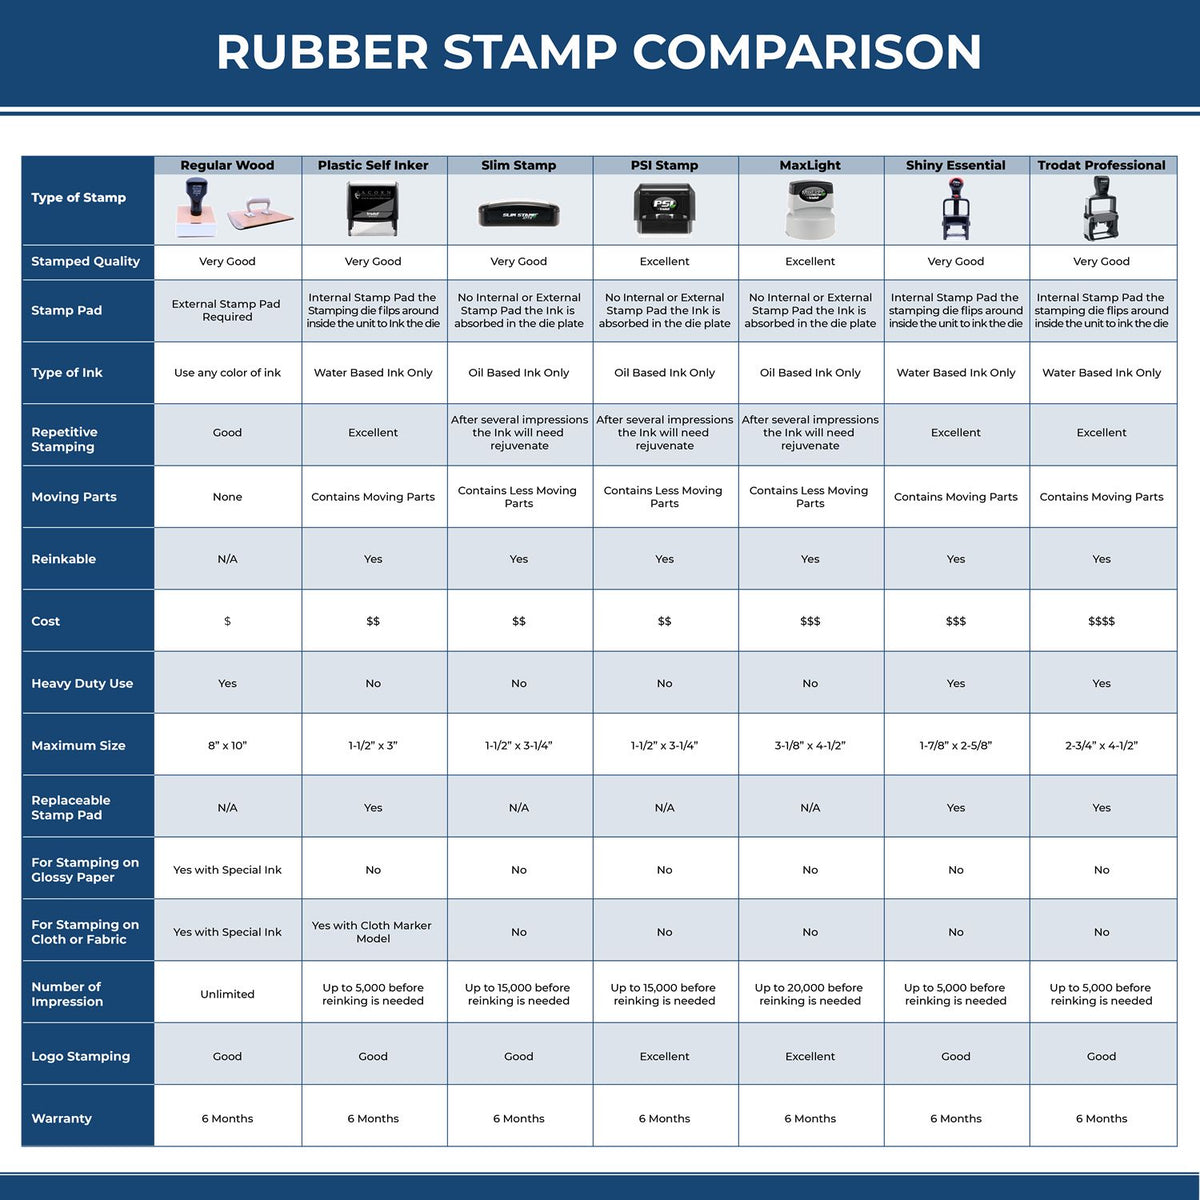 Received in Damaged Condition Rubber Stamp 4189R Rubber Stamp Comparison